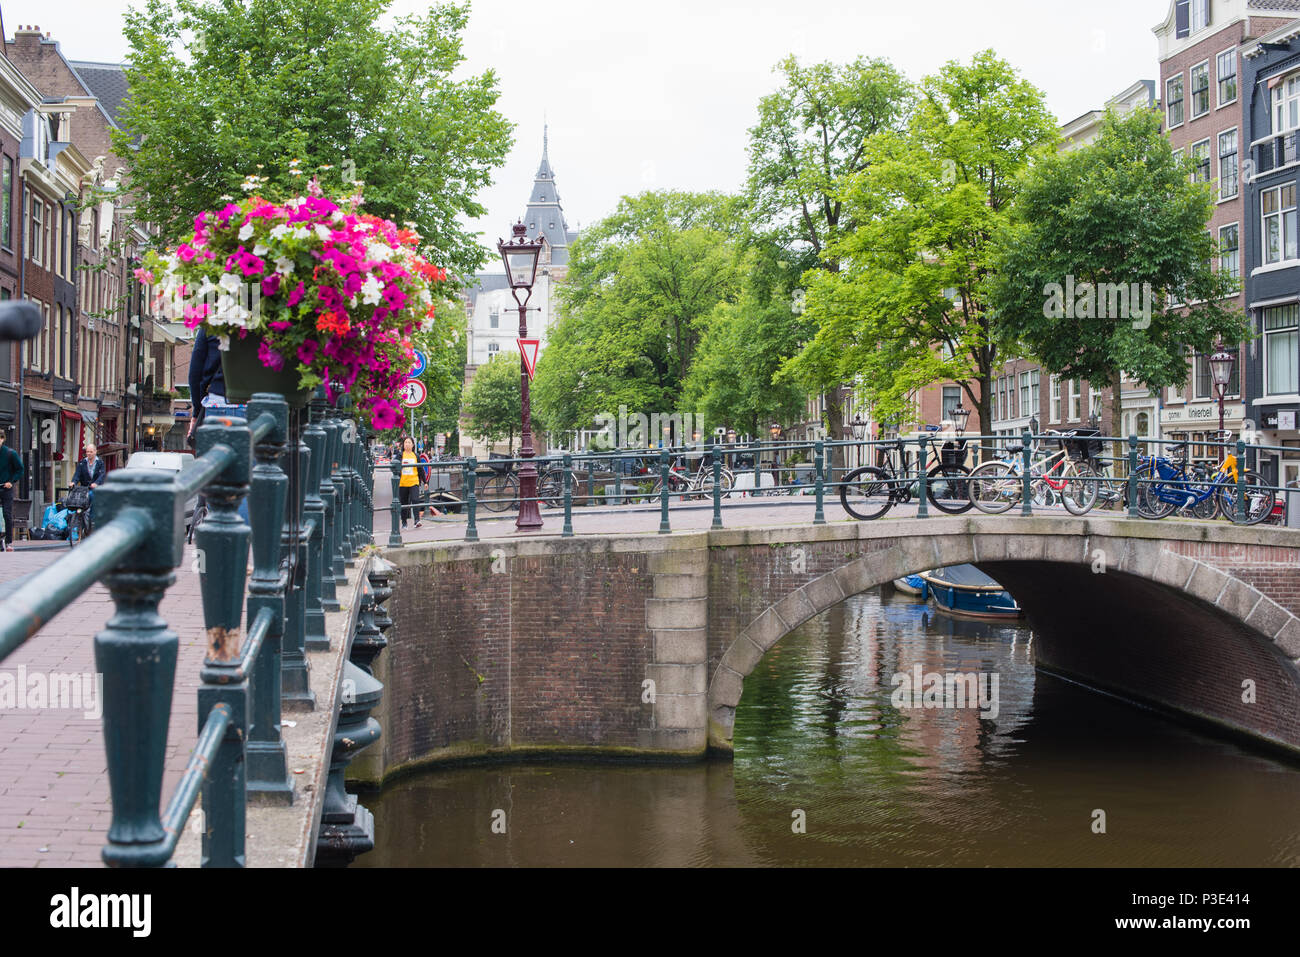 Amsterdam in bloom with bikes and canals Stock Photo